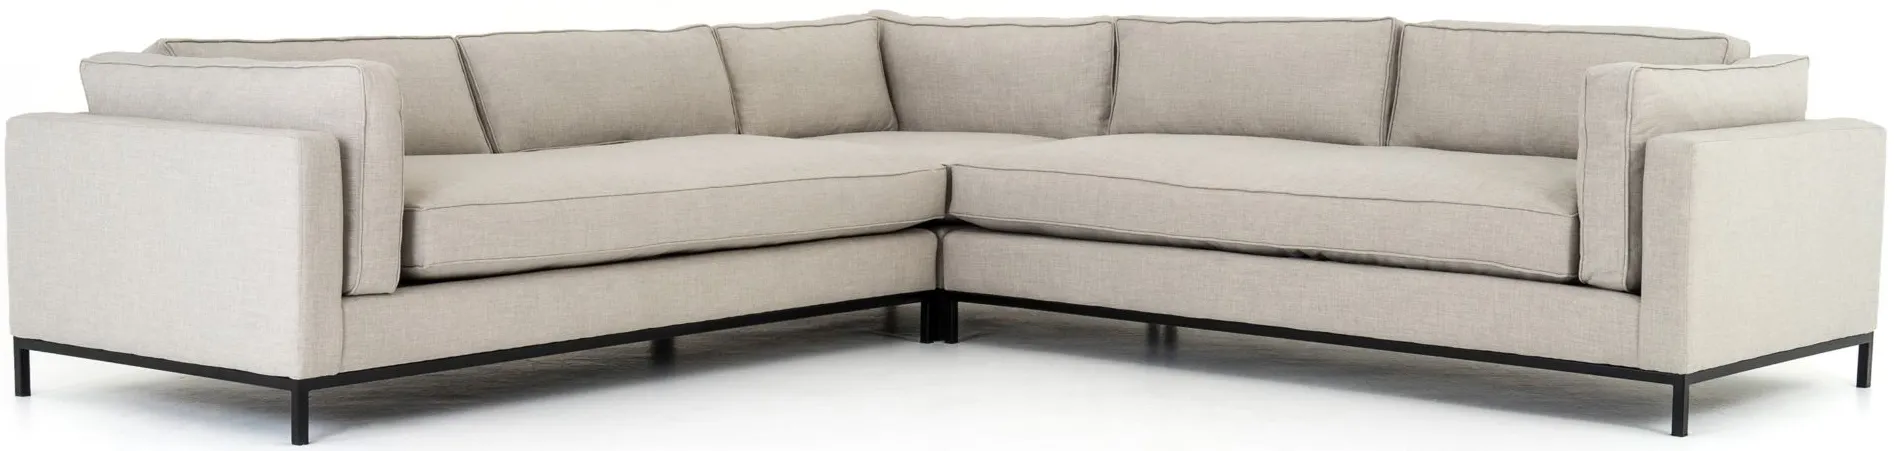 DuPar 3-pc. Sectional Sofa in Bennett Moon by Four Hands